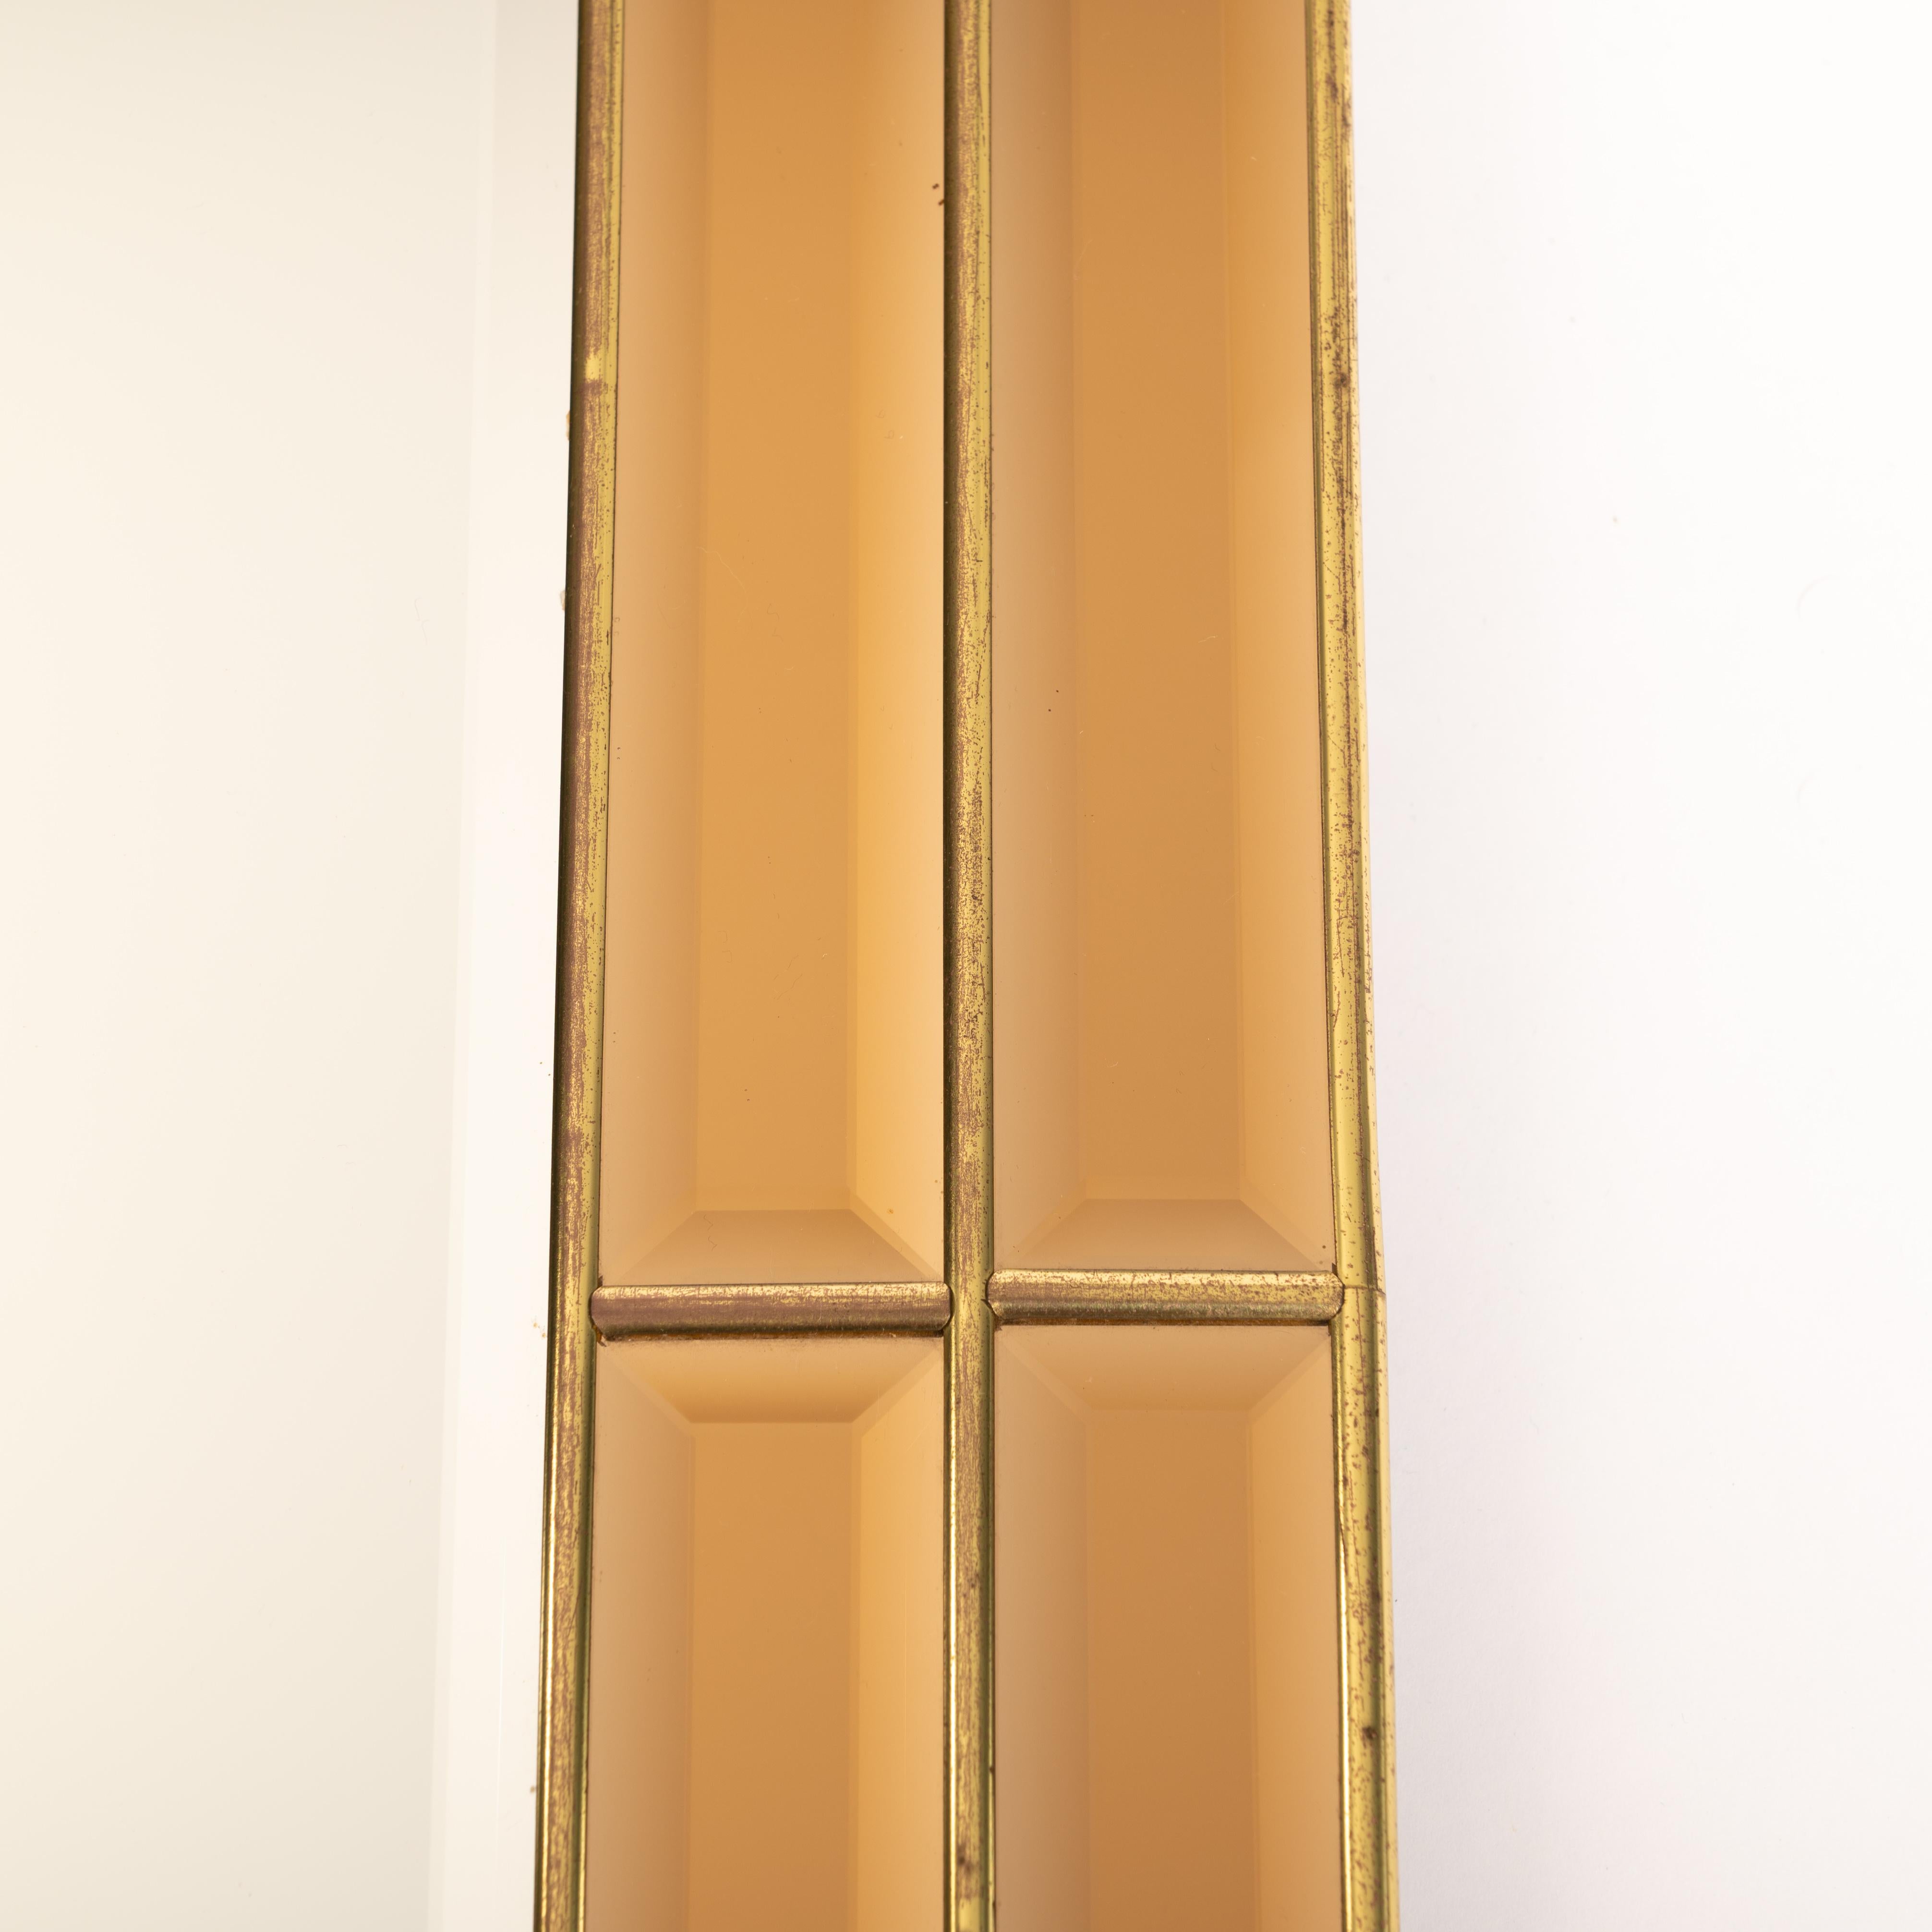 Late 20th Century Italian Mid-Century Mirror Amber-Gold Faceted Surfaces 1970s For Sale